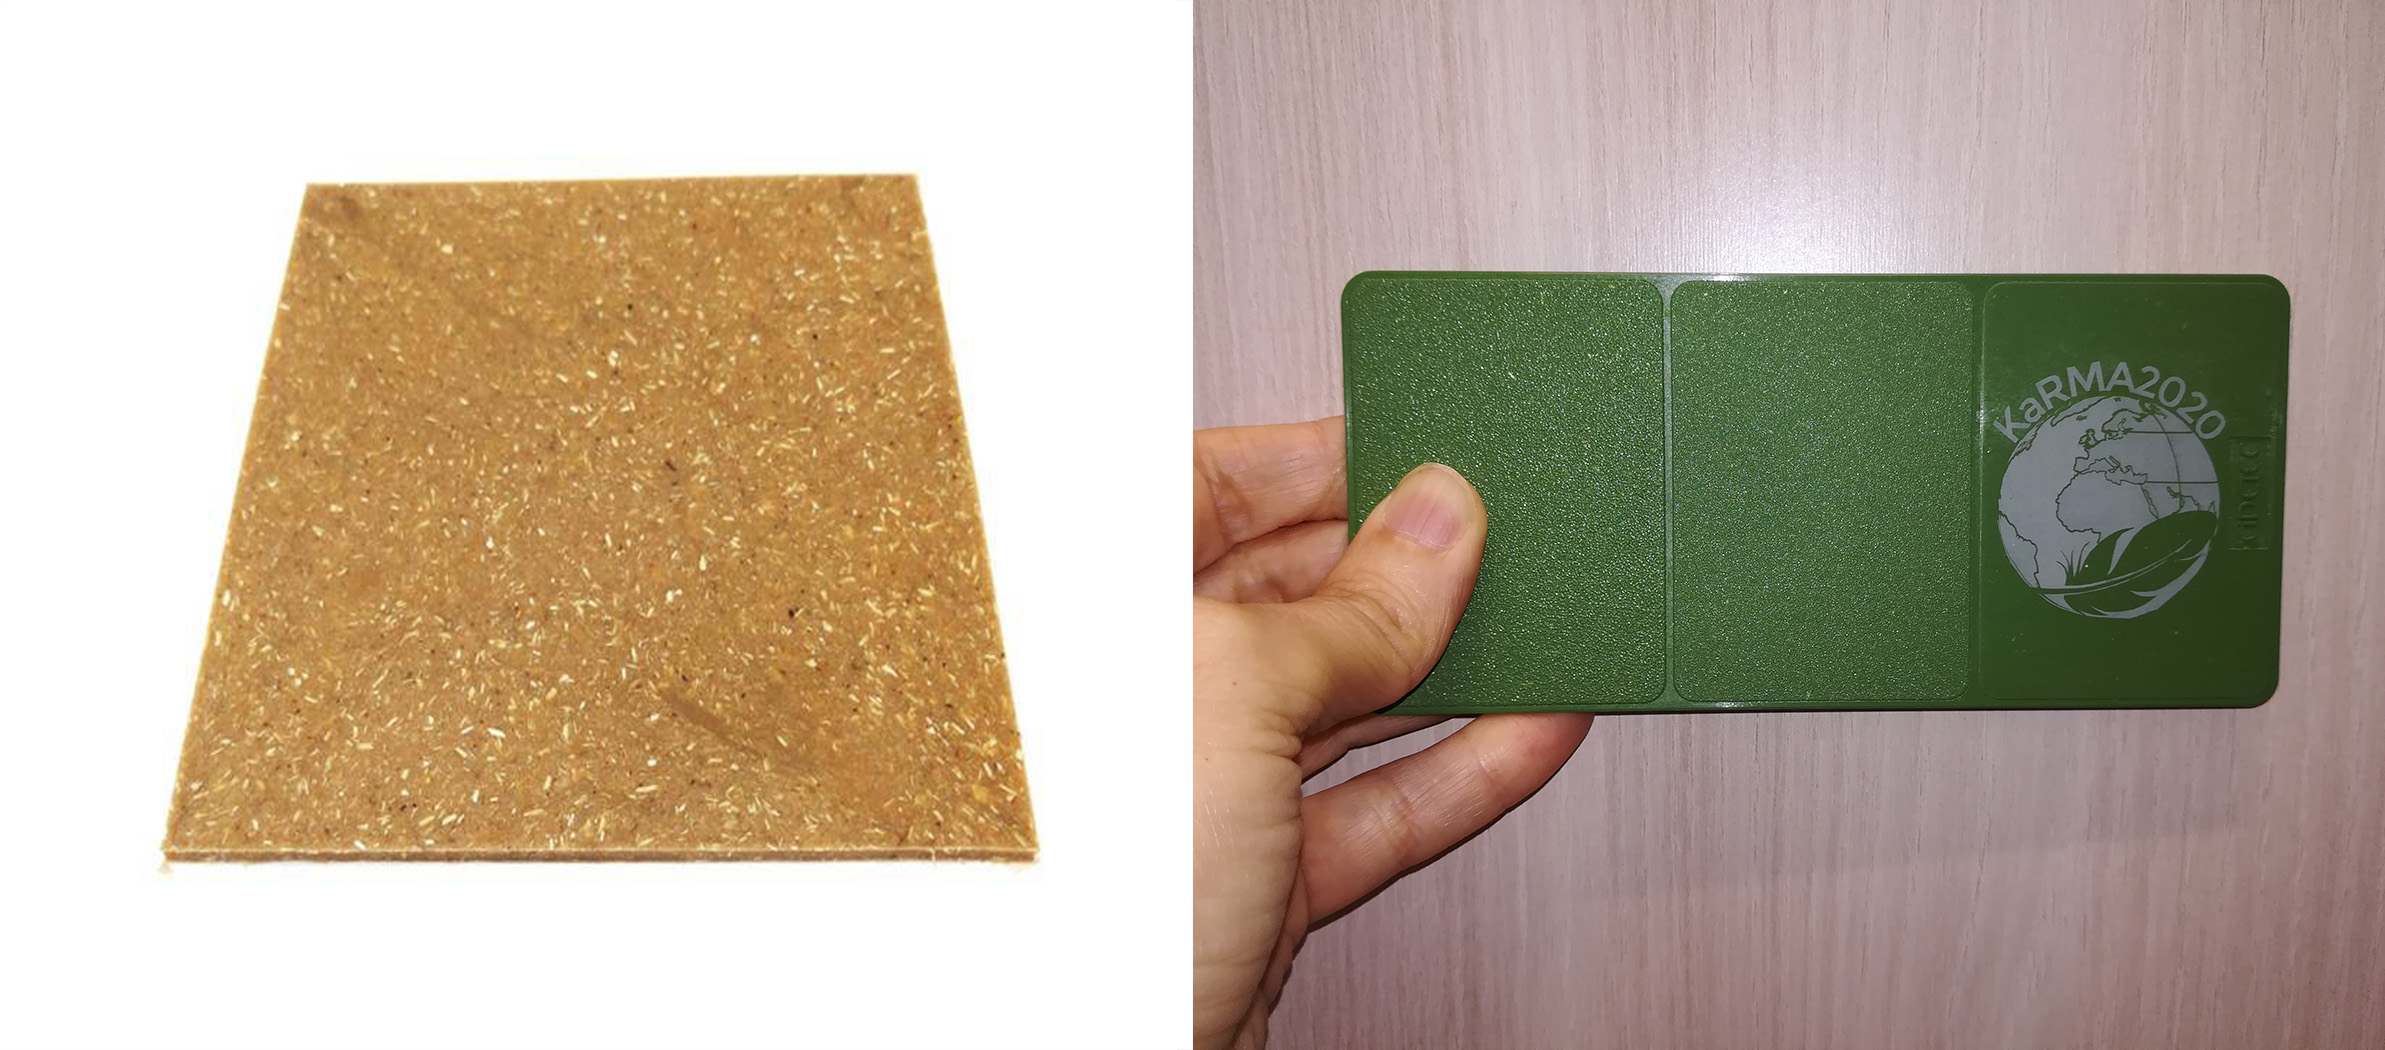 Chicken feathers can be used as raw material for composites (left) or for moulded plastic alternatives (right).